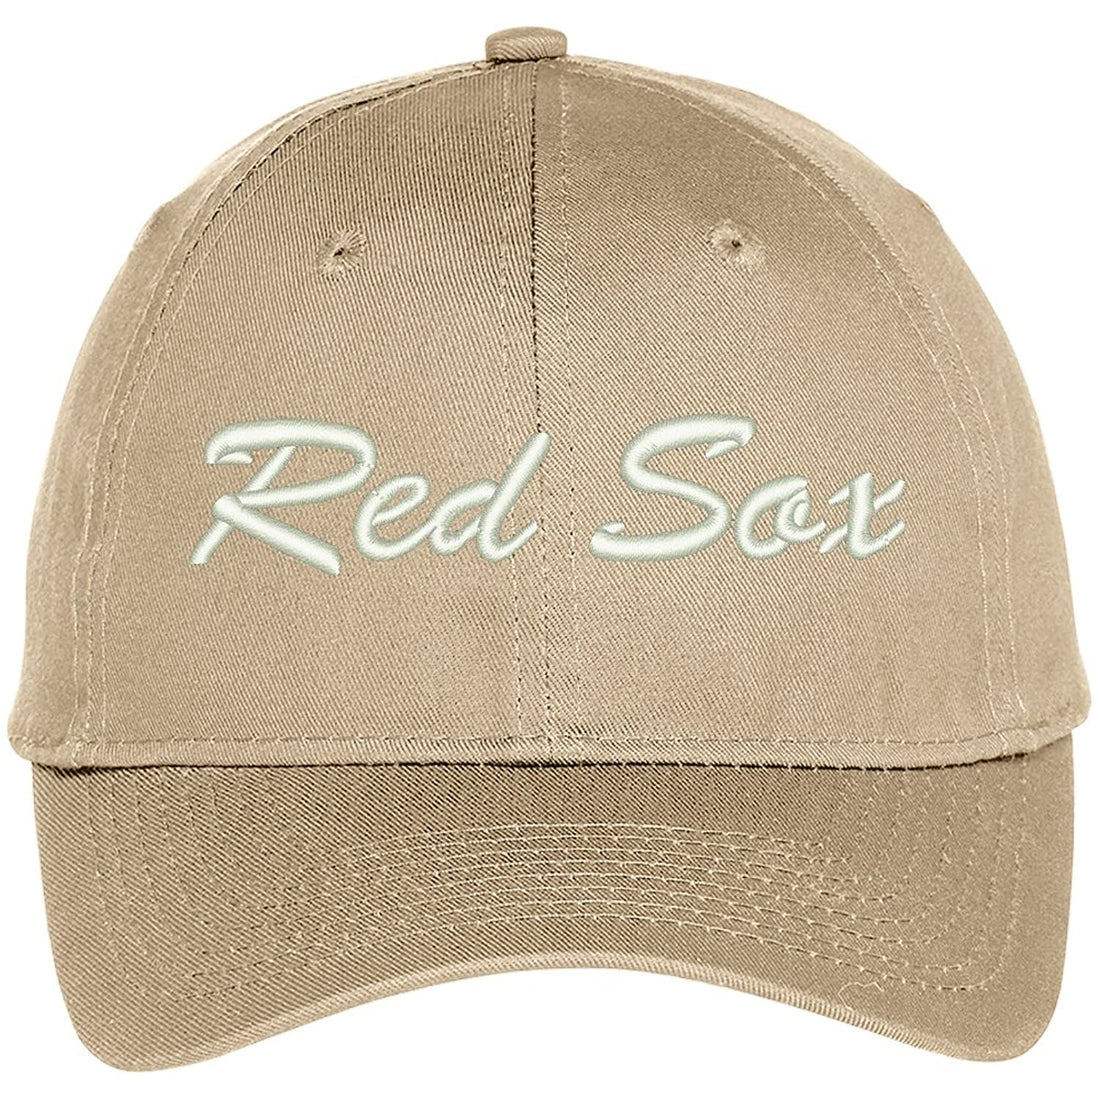 Trendy Apparel Shop Red Sox Embroidered Precurved Adjustable Cap